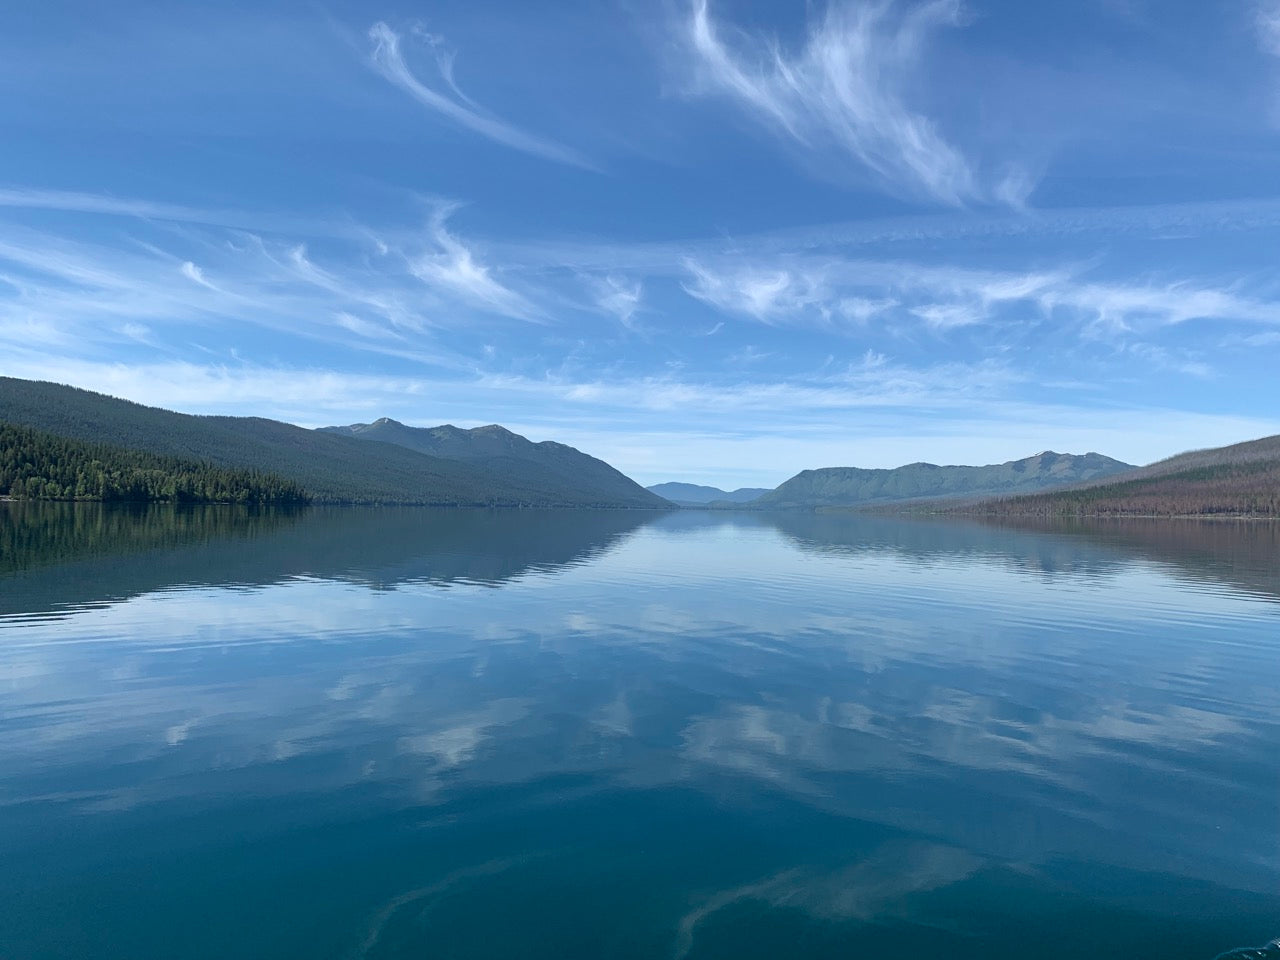 Picture from our boat tour on Lake McDonald in Montana